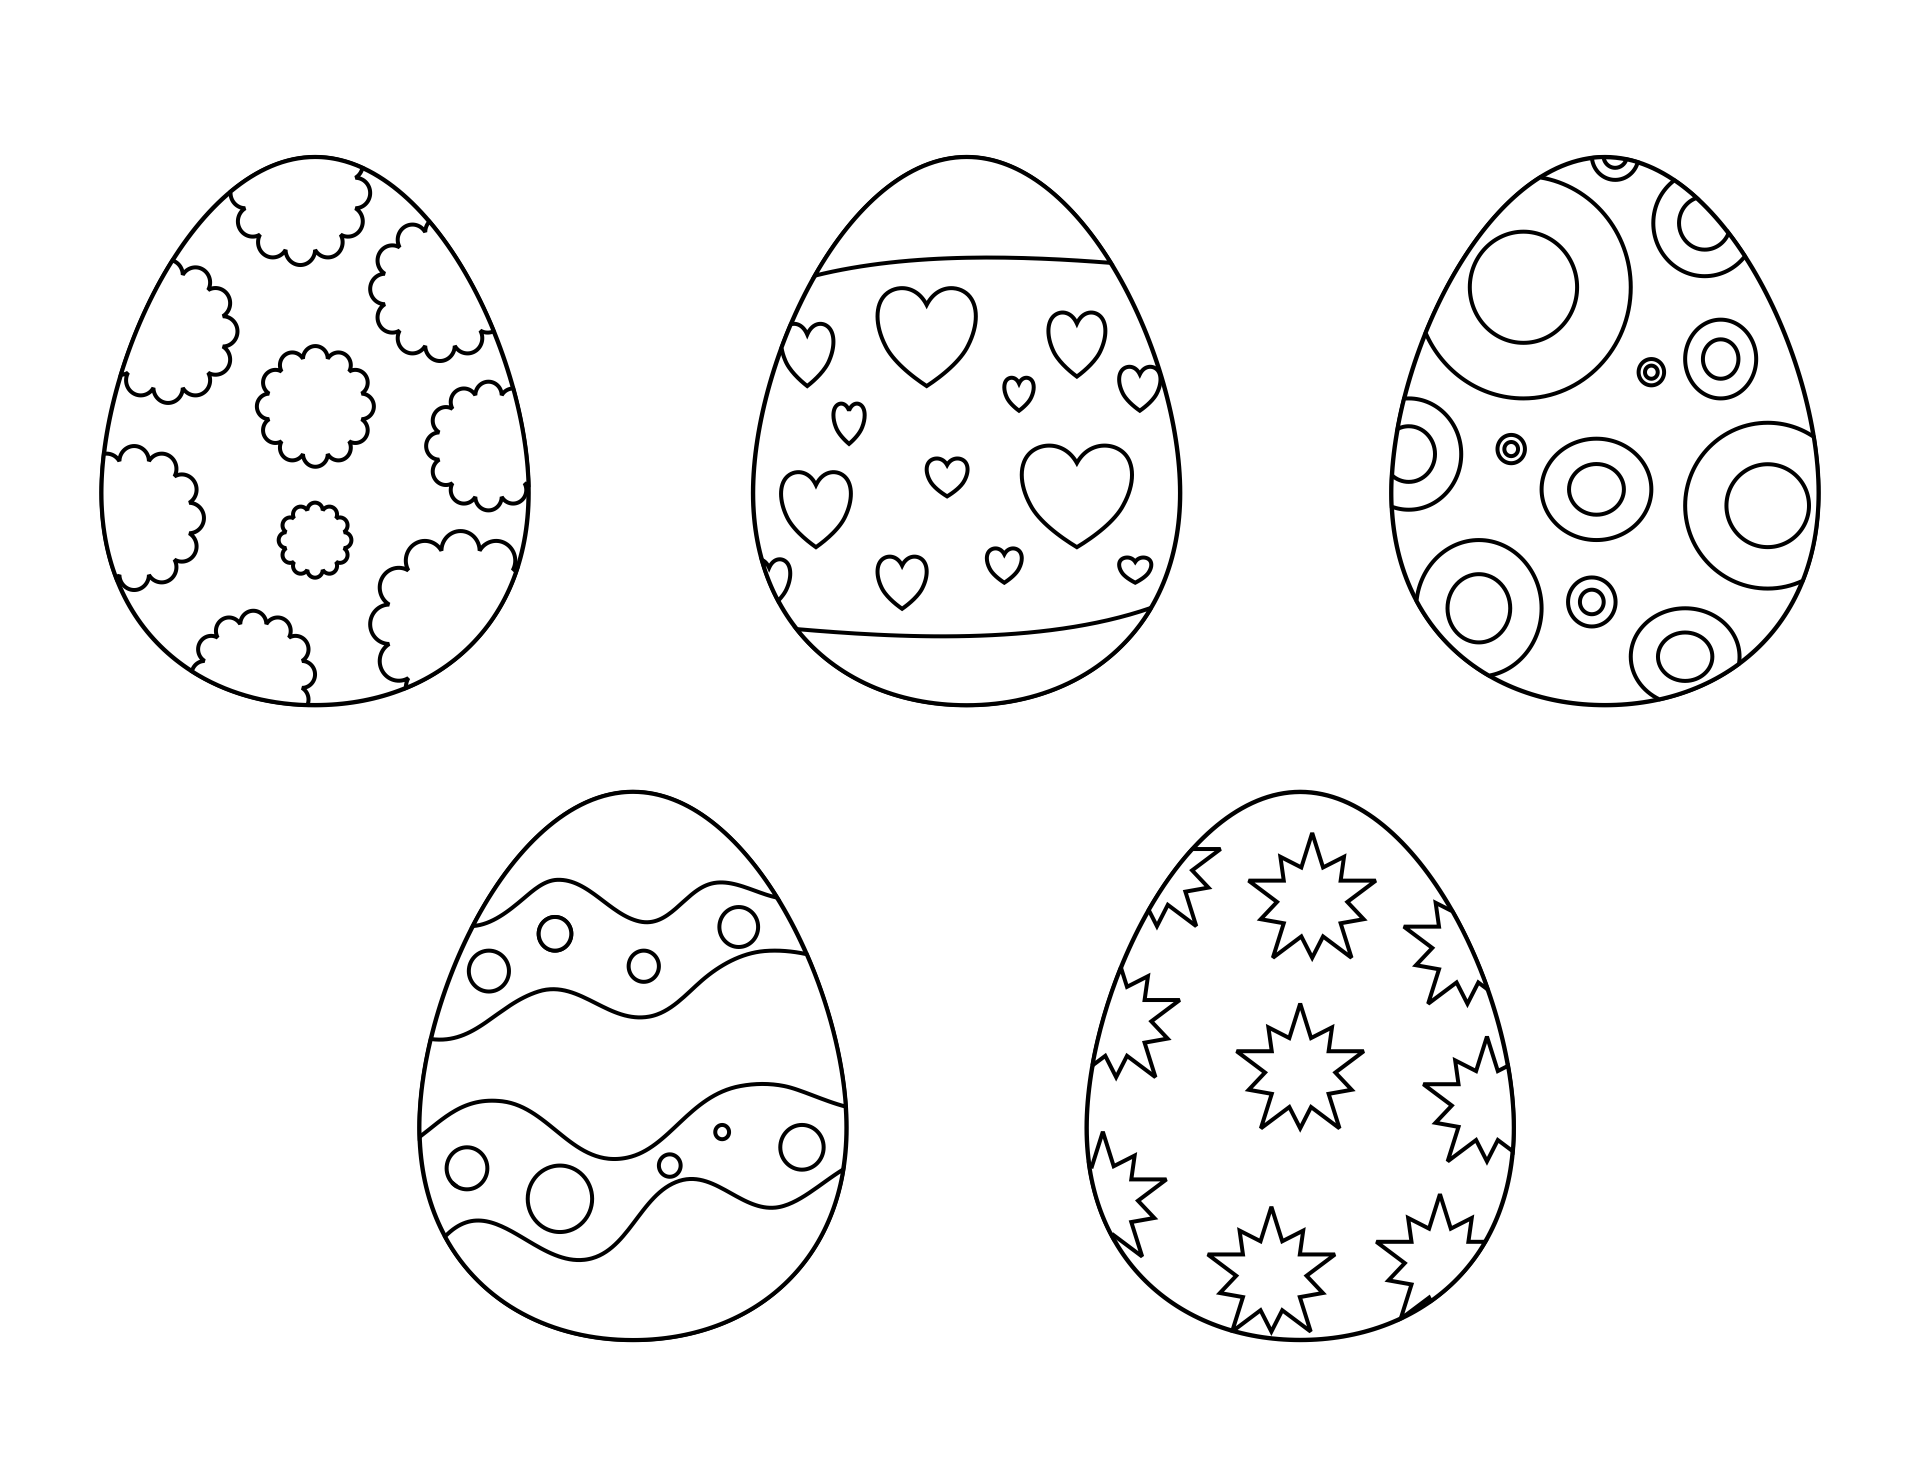 6 Best Images of Free Easter Printable Craft Templates Easter Chick